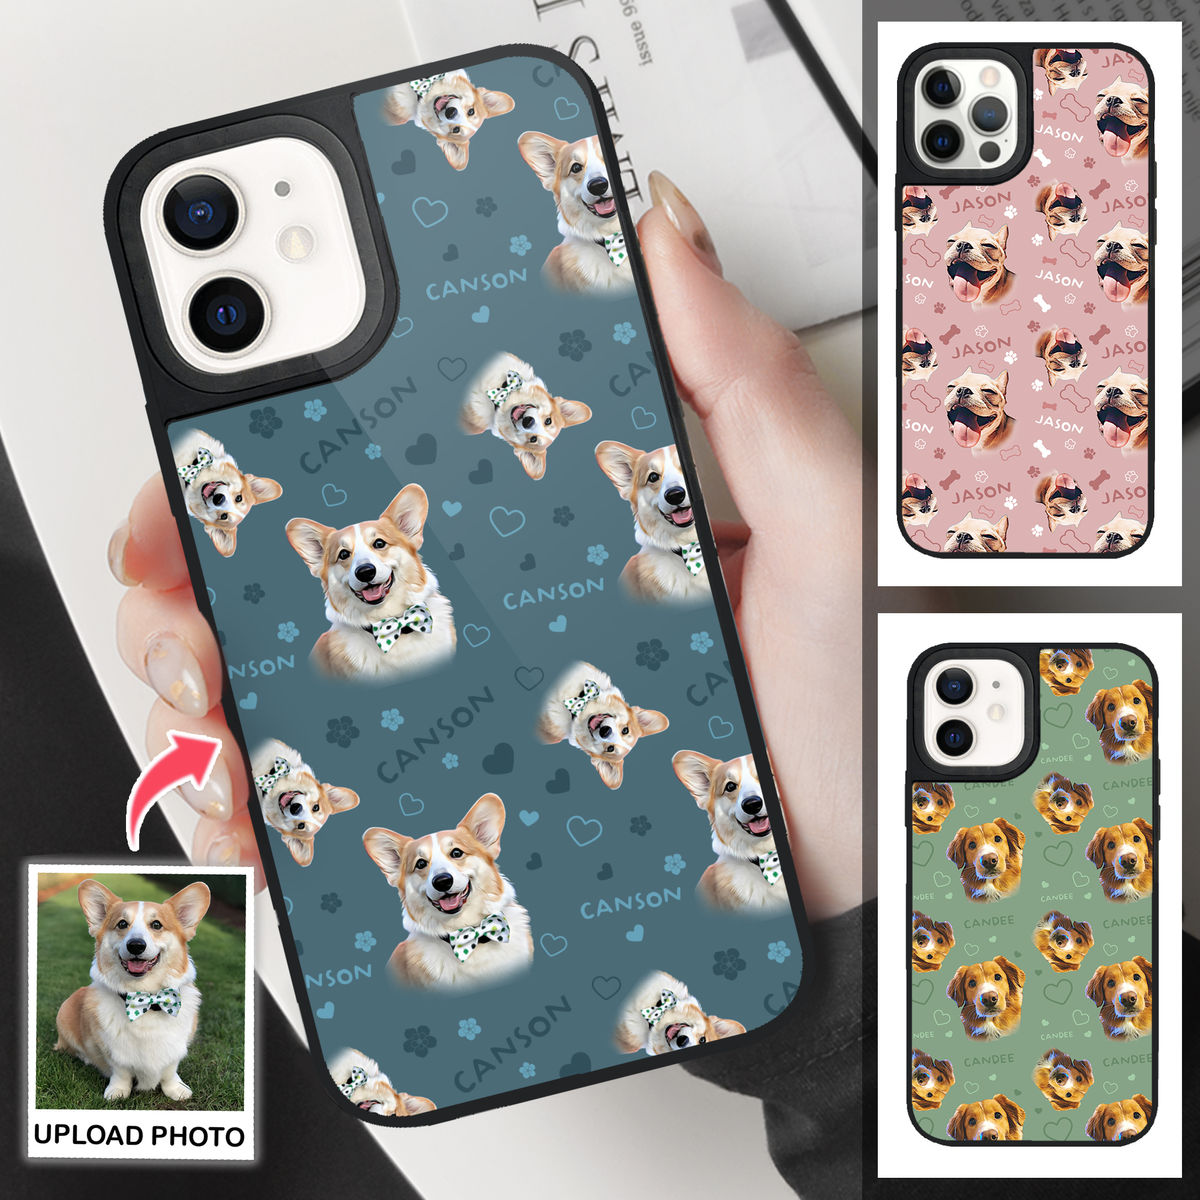 iPhone Case - Pet Lover Gifts - Dog Portrait Pattern - Digital Oil Painting  (B)